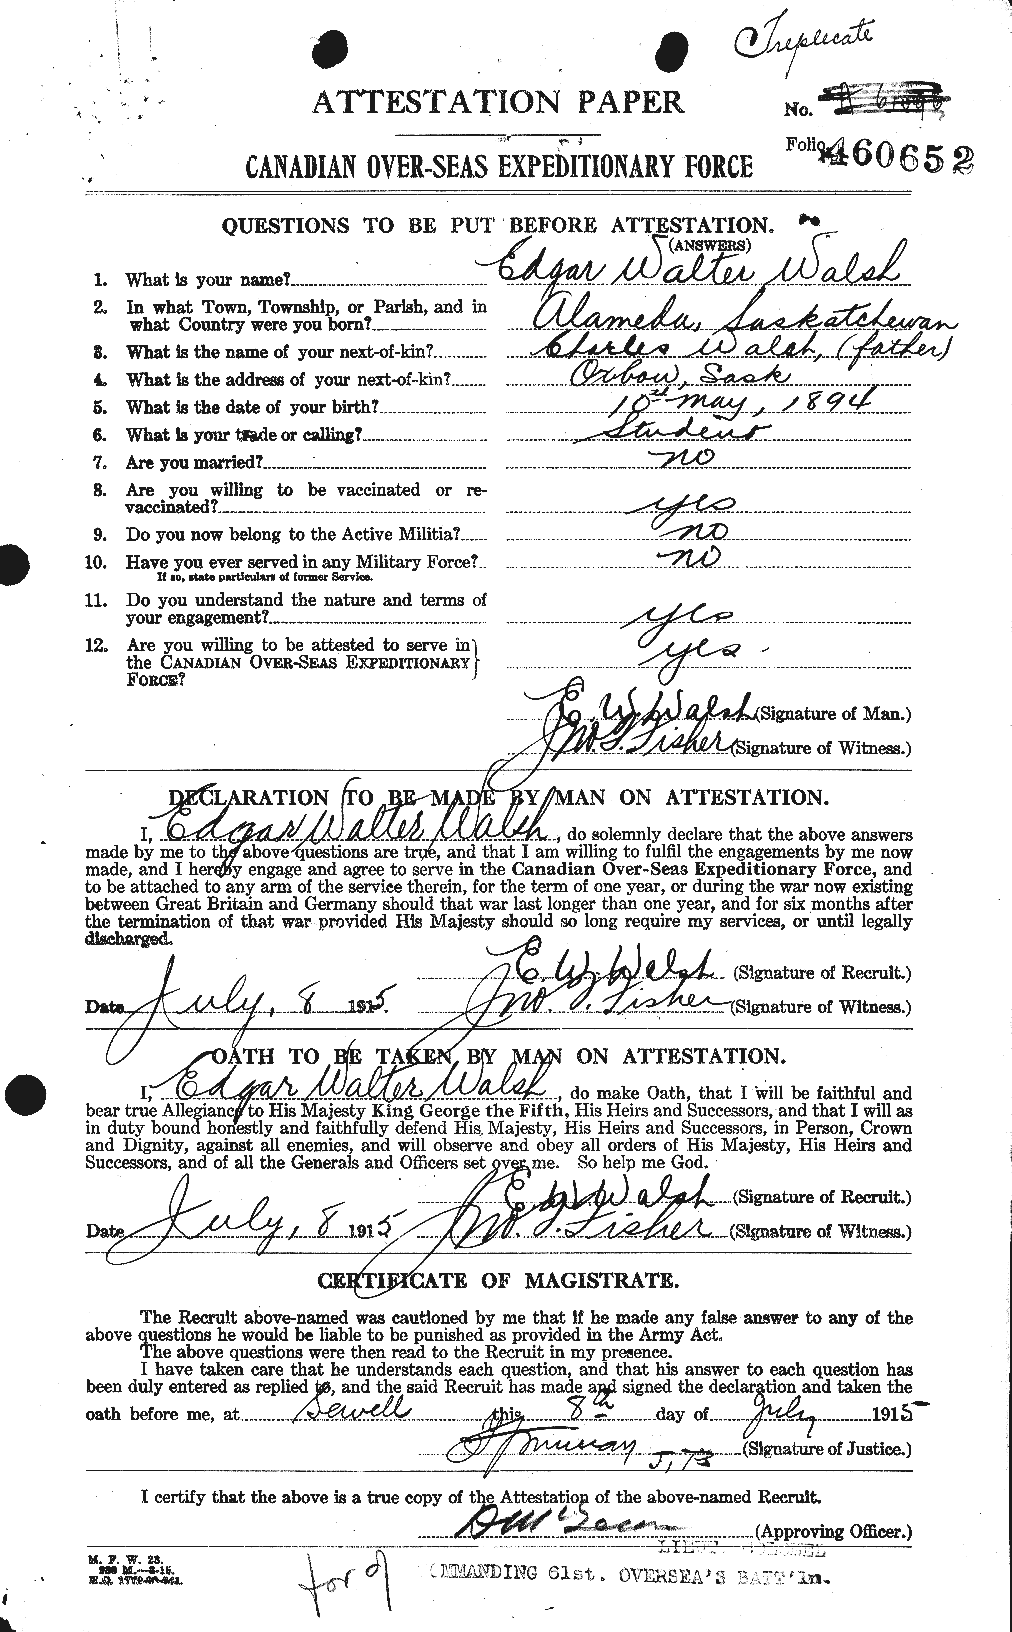 Personnel Records of the First World War - CEF 652714a